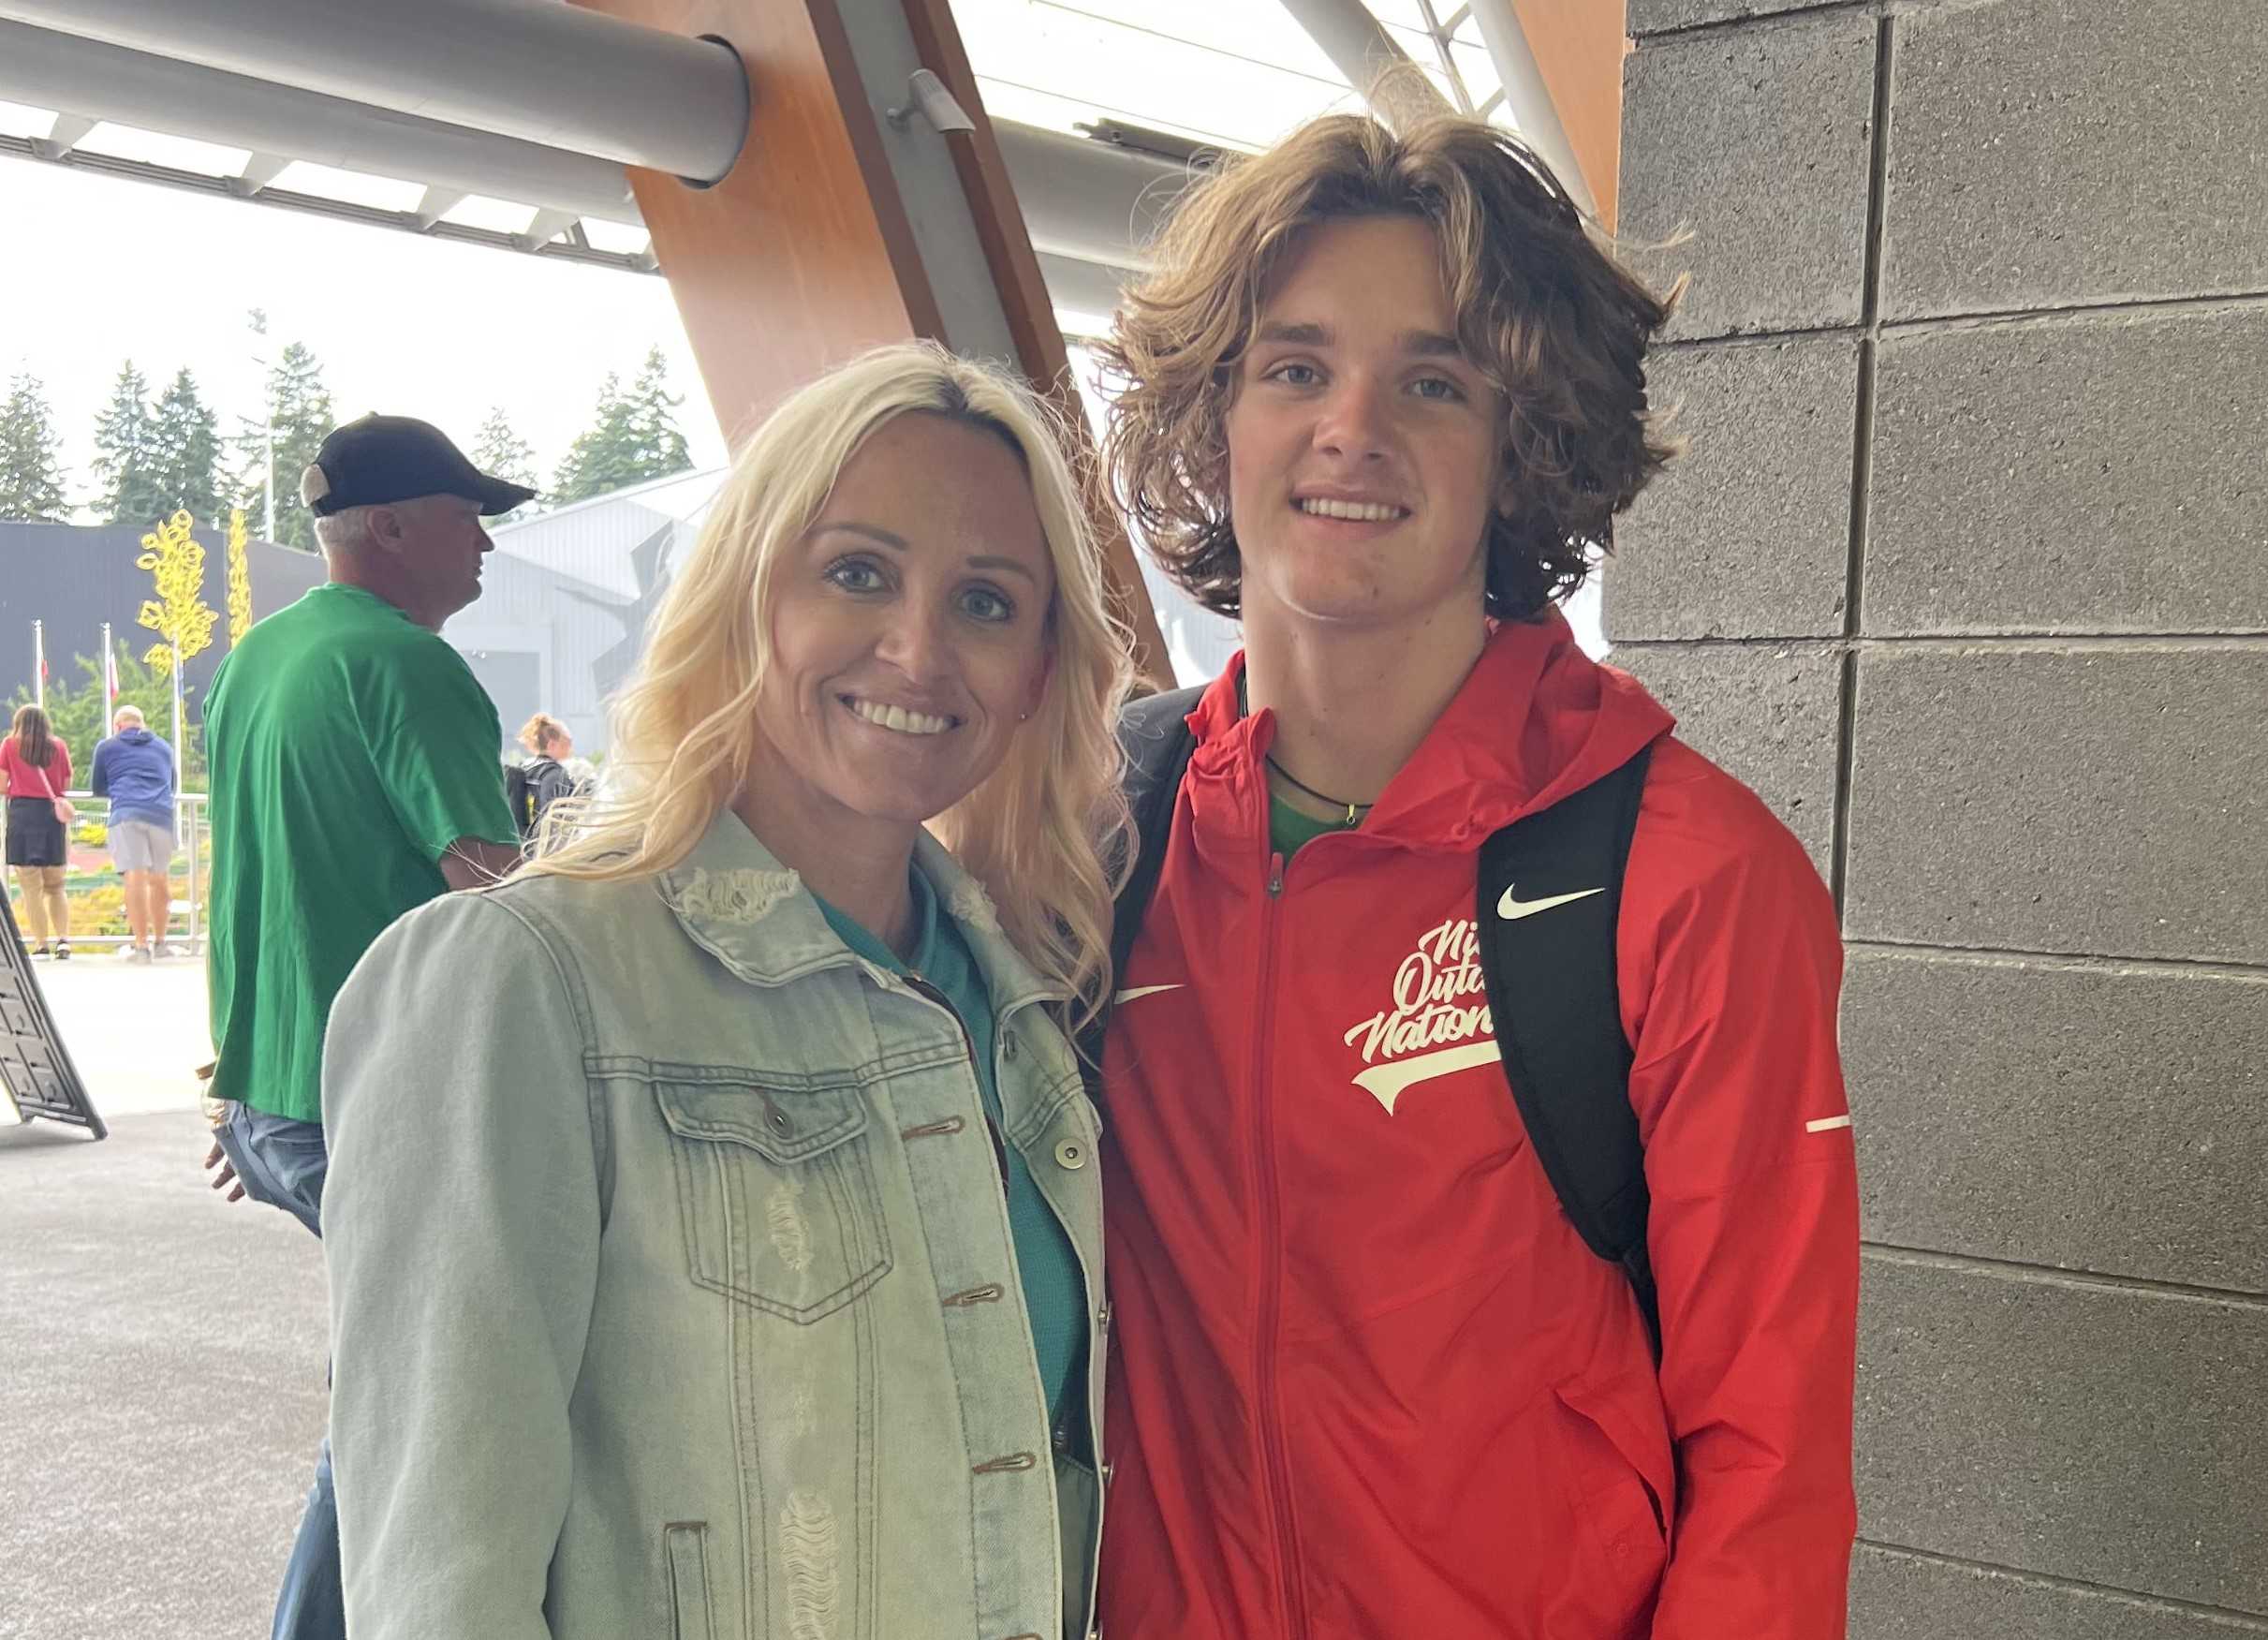 Marshfield's Bodey Lutes, the reigning 4A champion in the 400, and his mother, Amy Nickerson, an 11-time state champion.